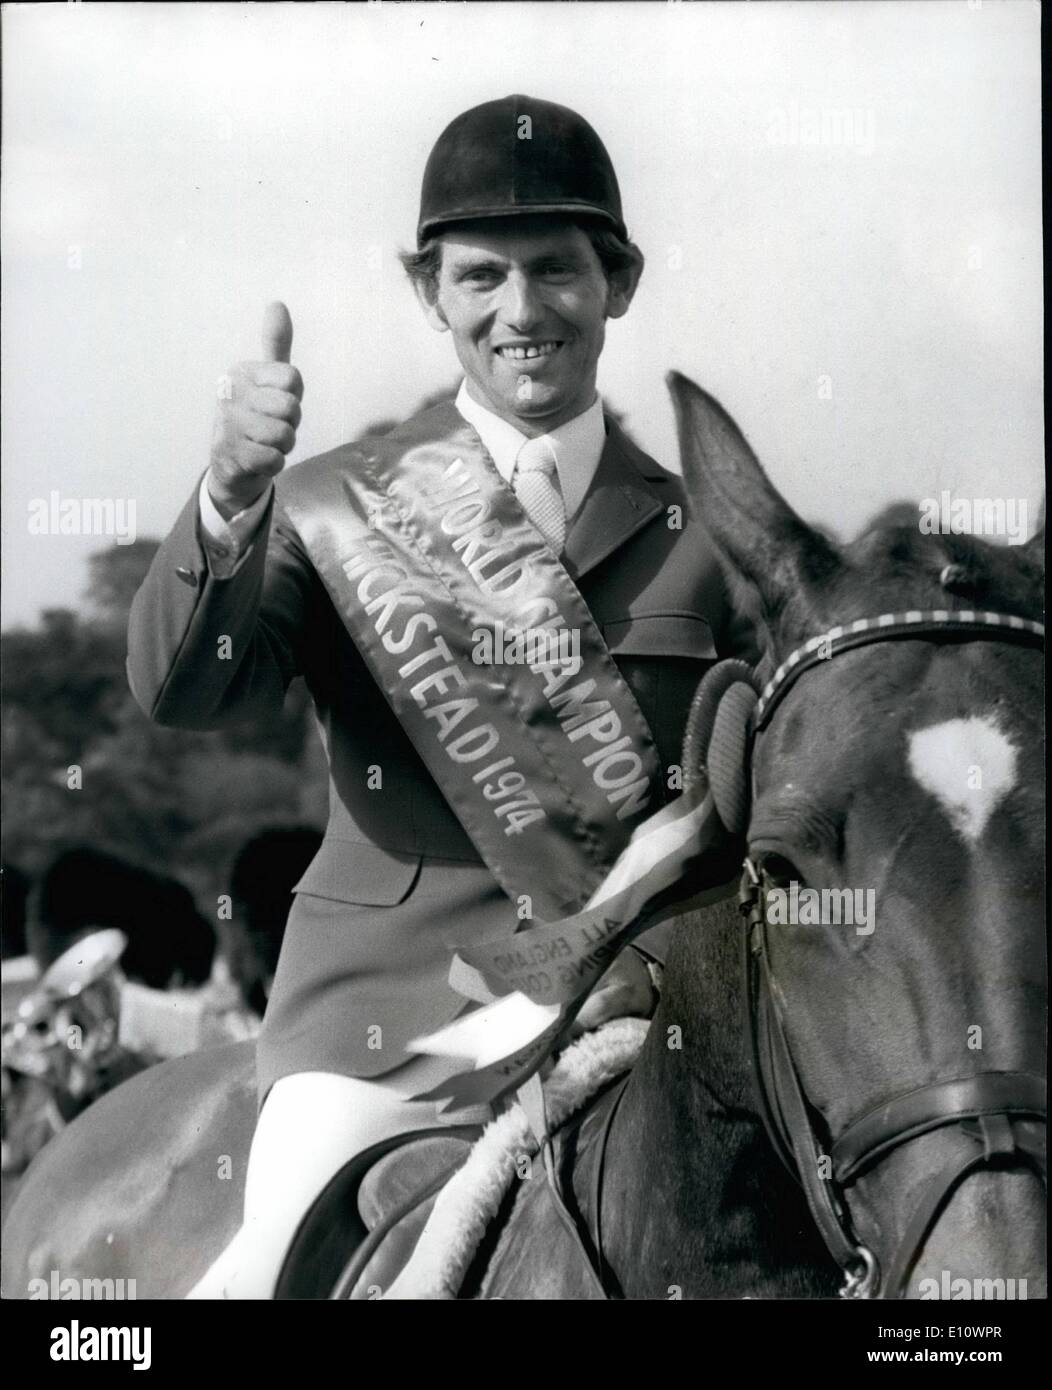 Jul. 07, 1974 - West Germany's Hartwig Steenken wins the World Show Jumping Championship at Hickstead: Hartwig Steeknek, of West Germany, won the World Show Jumping Championship at Hickstend yesterday on his grant more '' Simona '' Photo shows Germany's Hartwig Steenken seated on his mount Simouna and wearing his winning sash, given the thumbs-up sign after his great triump at Hickstead yesterday. Stock Photo